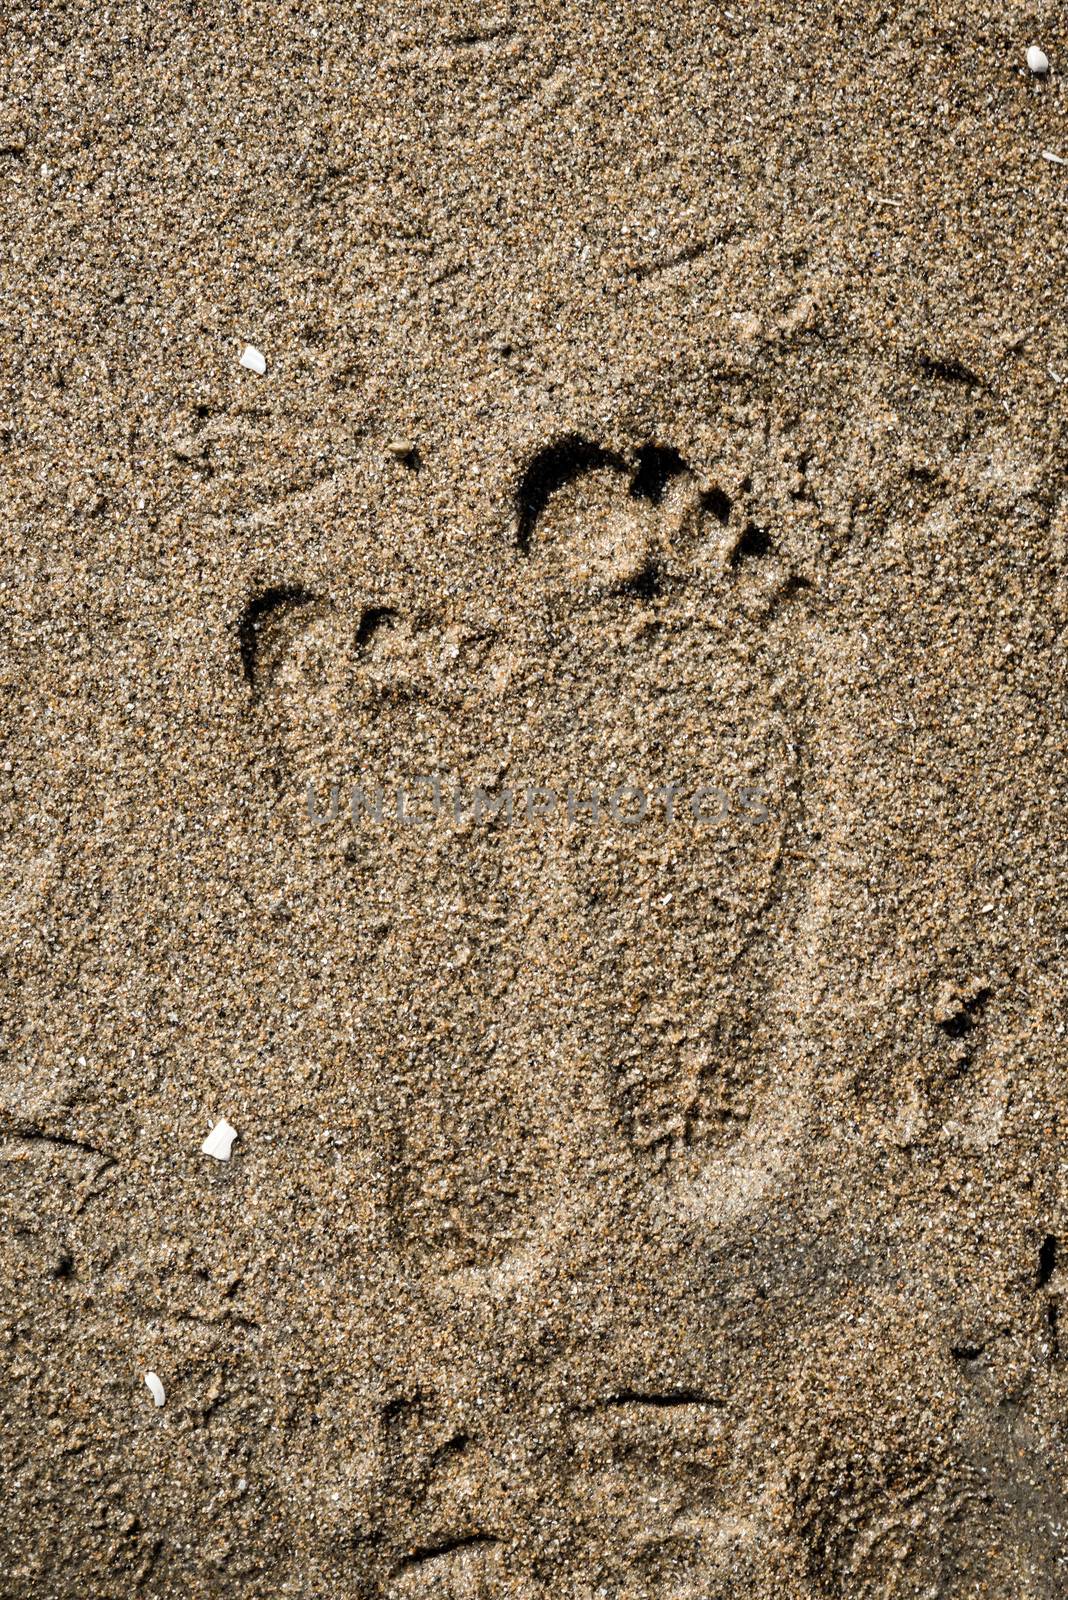 Foot prints on a beach  by IVYPHOTOS